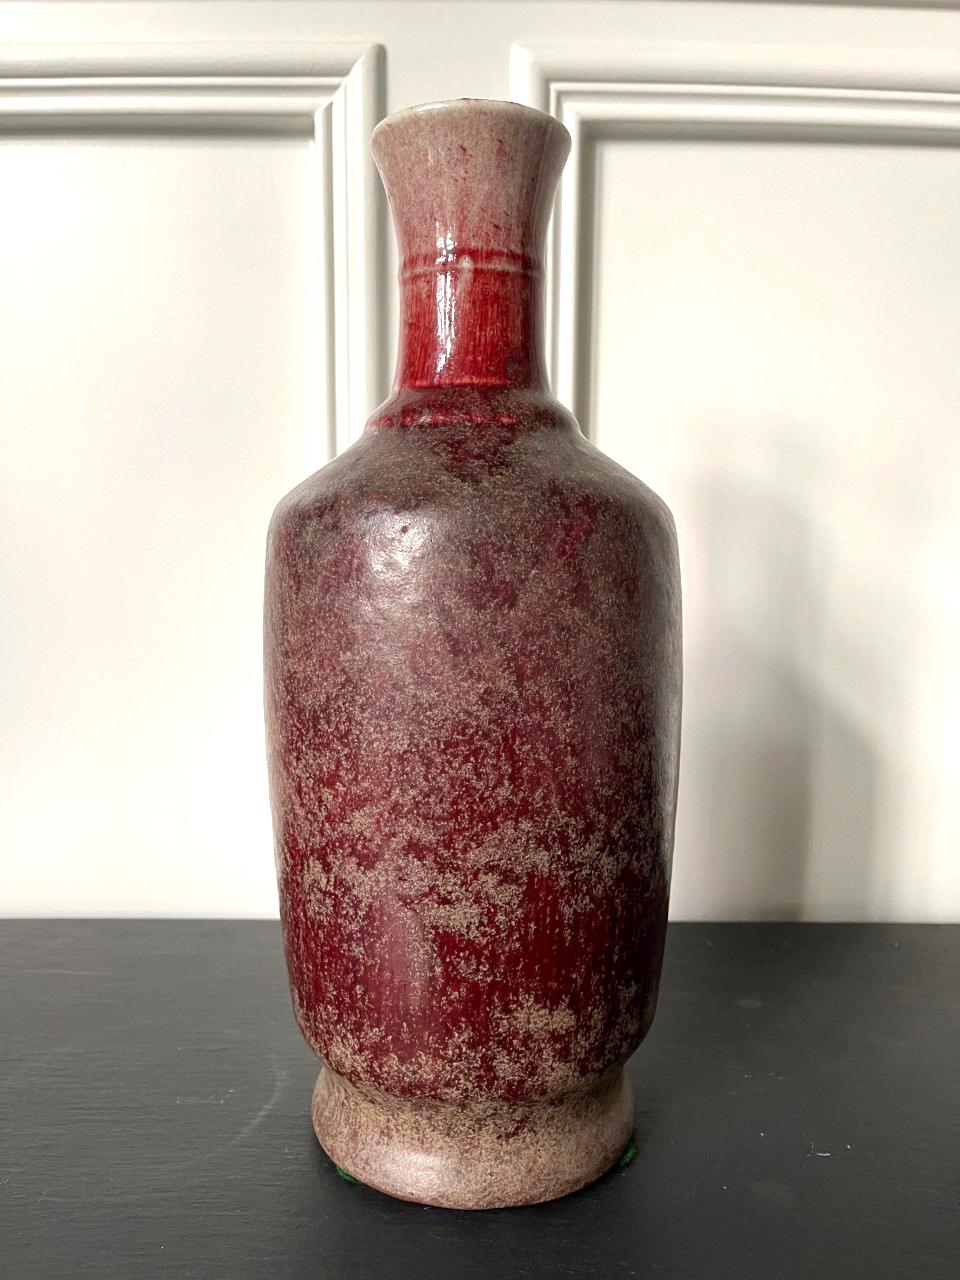 A large Chinese vase with Sang-de-Boeuf (oxblood) glaze in a classic baluster form with a tall narrow neck and horizontal bands around the shoulder. The oxblood glaze is known as Langyao Red in Chinese. It is a copper based glaze originated in Ming